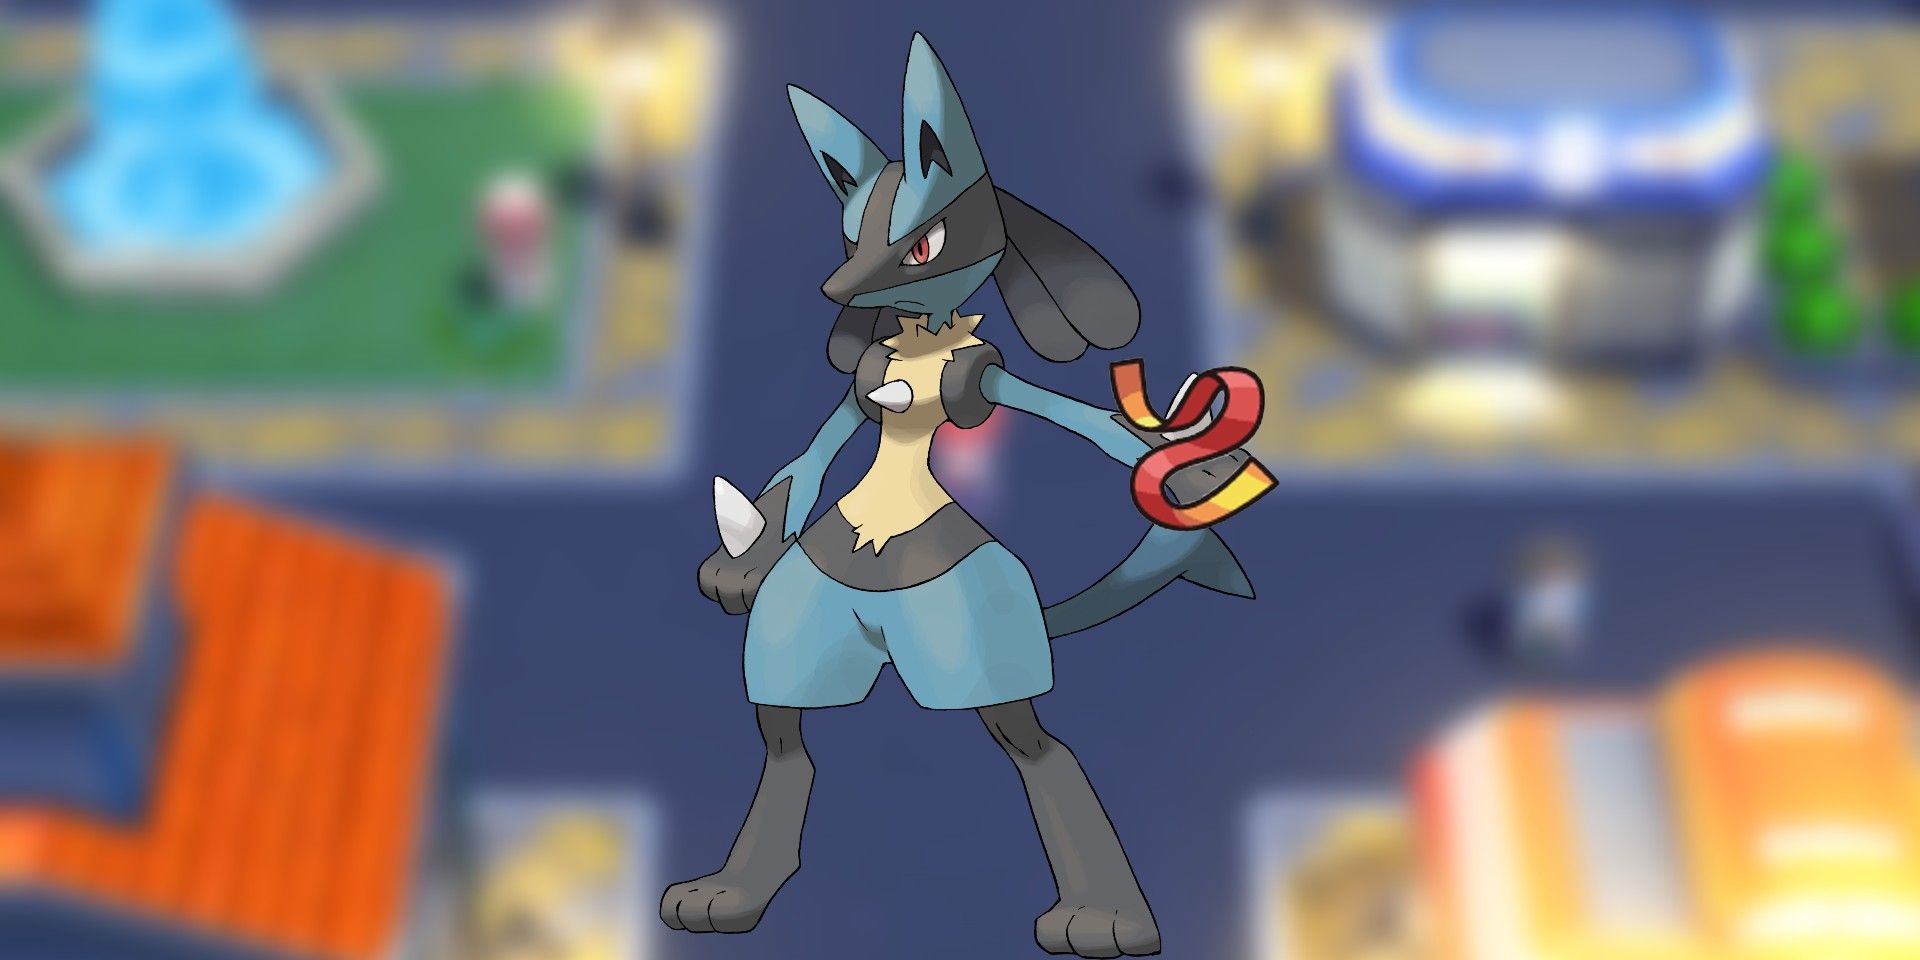 An image of Lucario over a blurry background of Pokémon BDSP